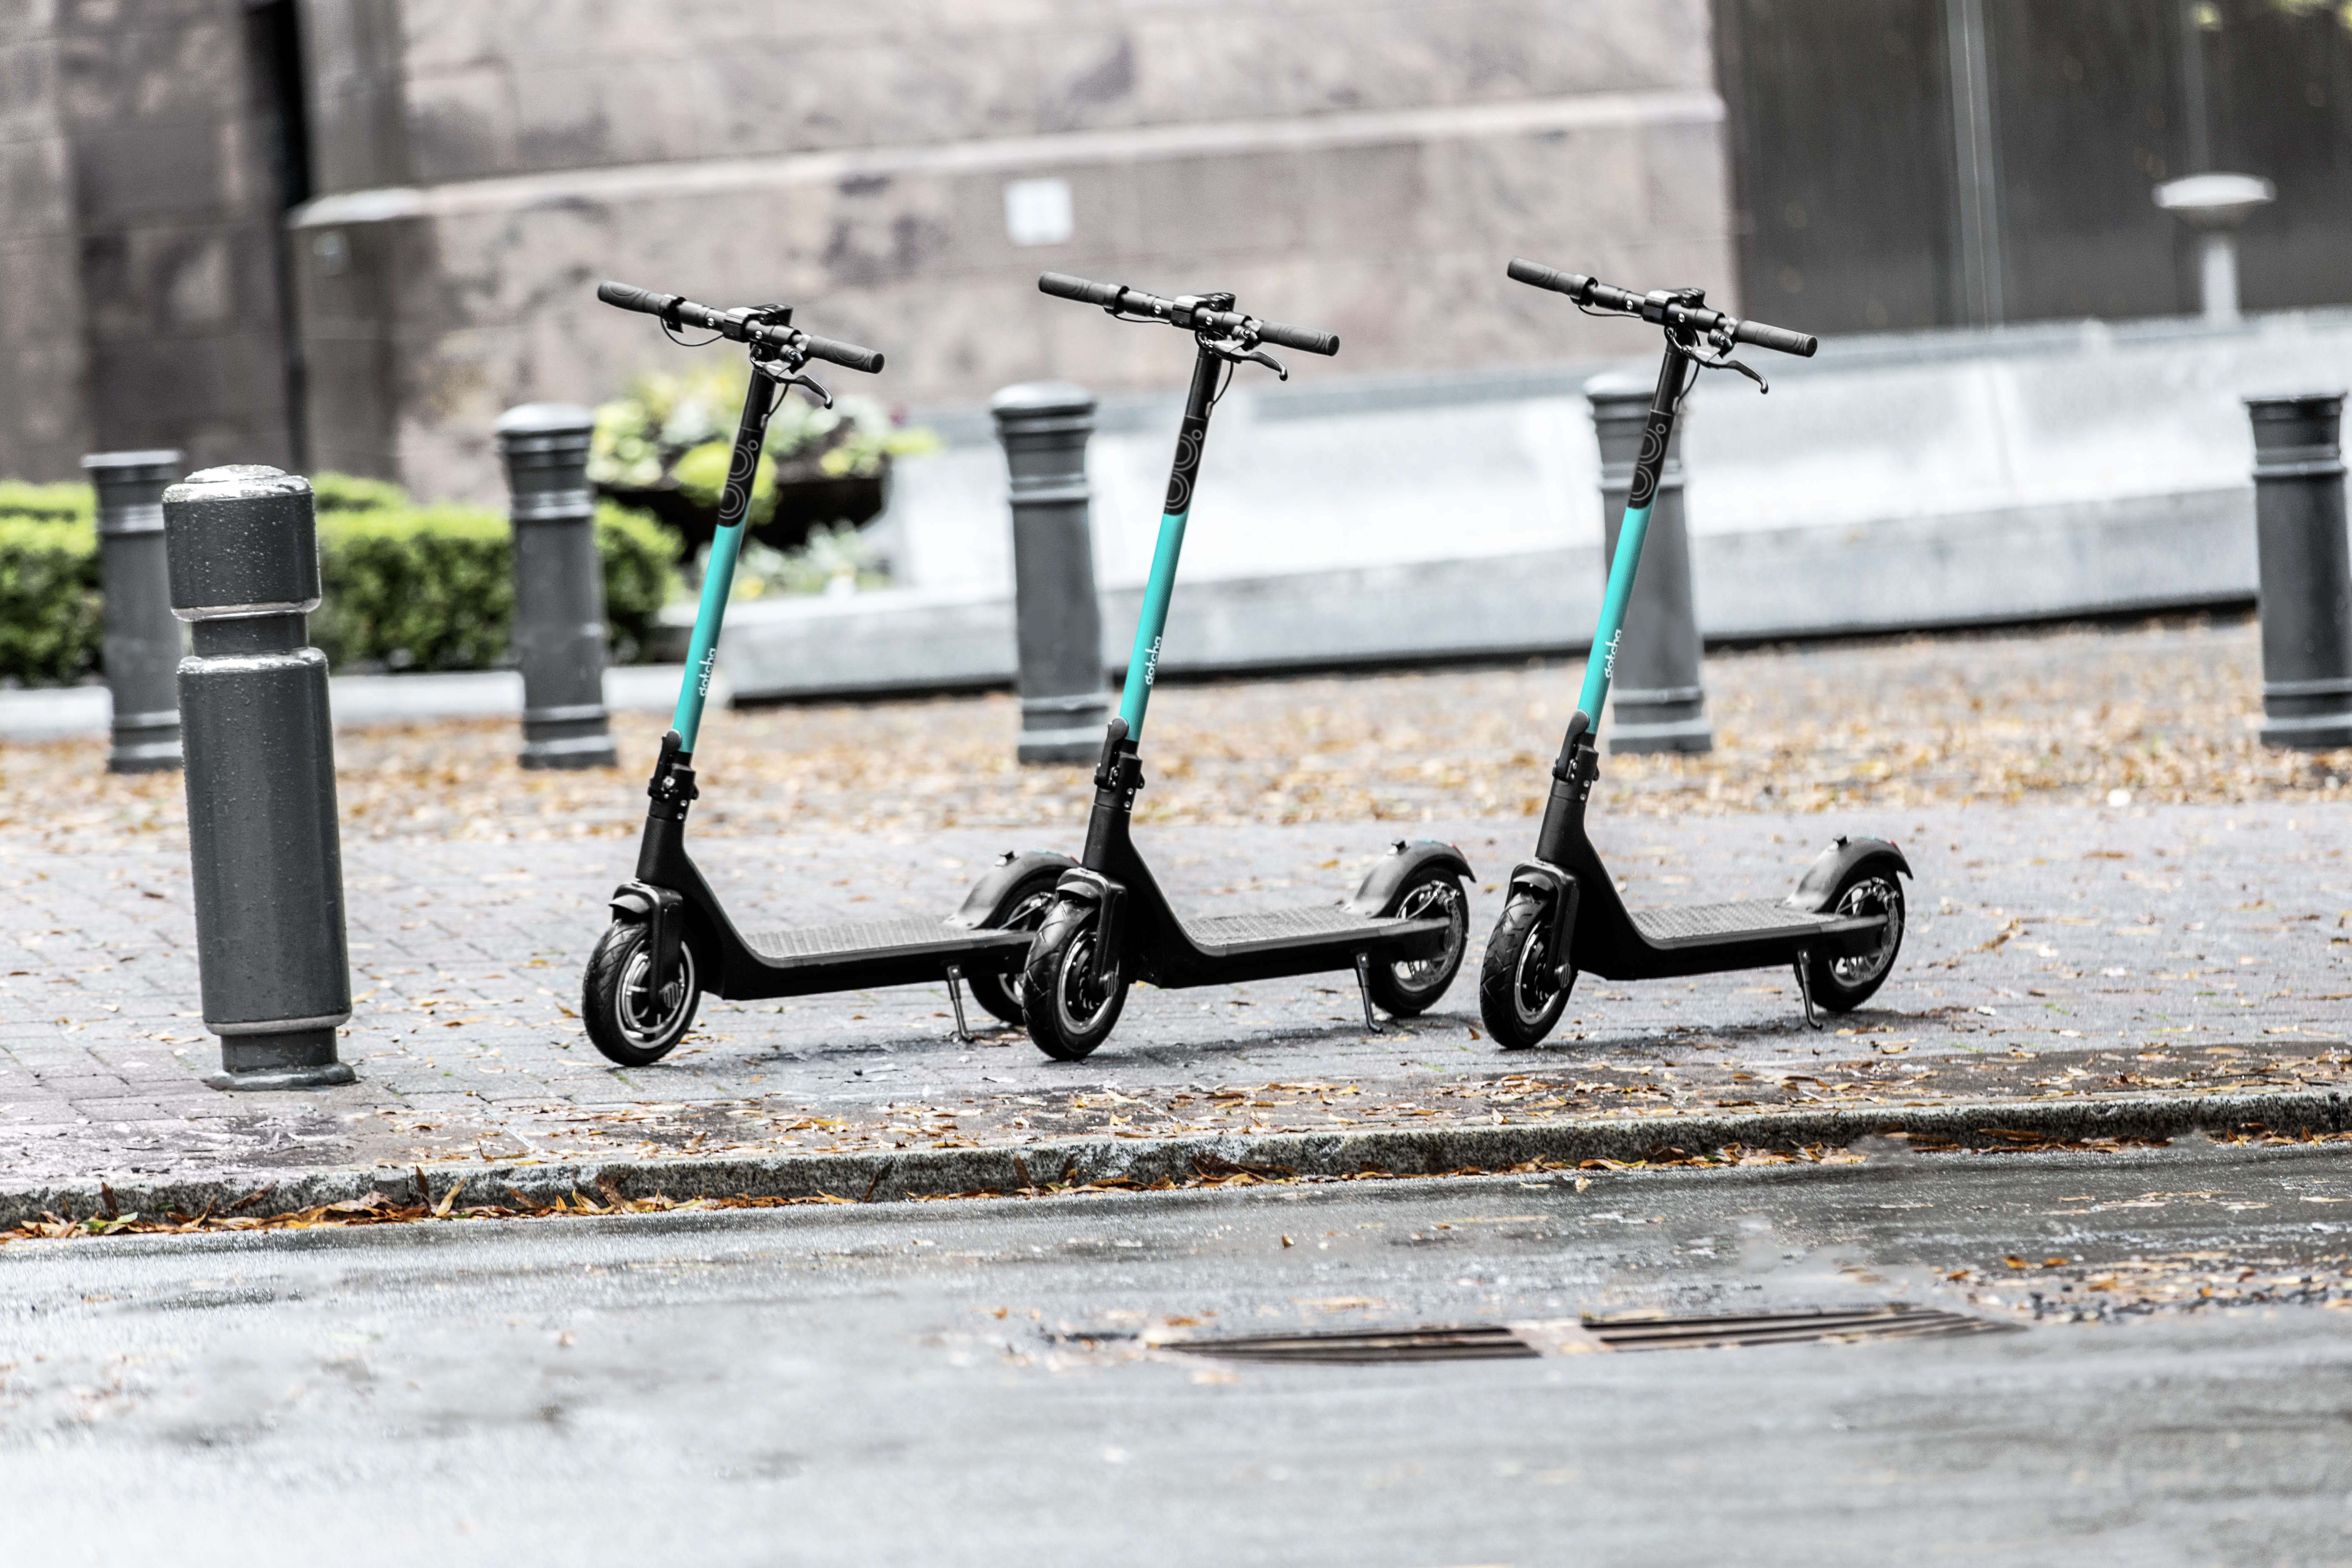 I'm sleepy discount Daddy So long, scooters. Bolt Mobility leaves Mobile with few reported  incidences, some lingering concerns - al.com